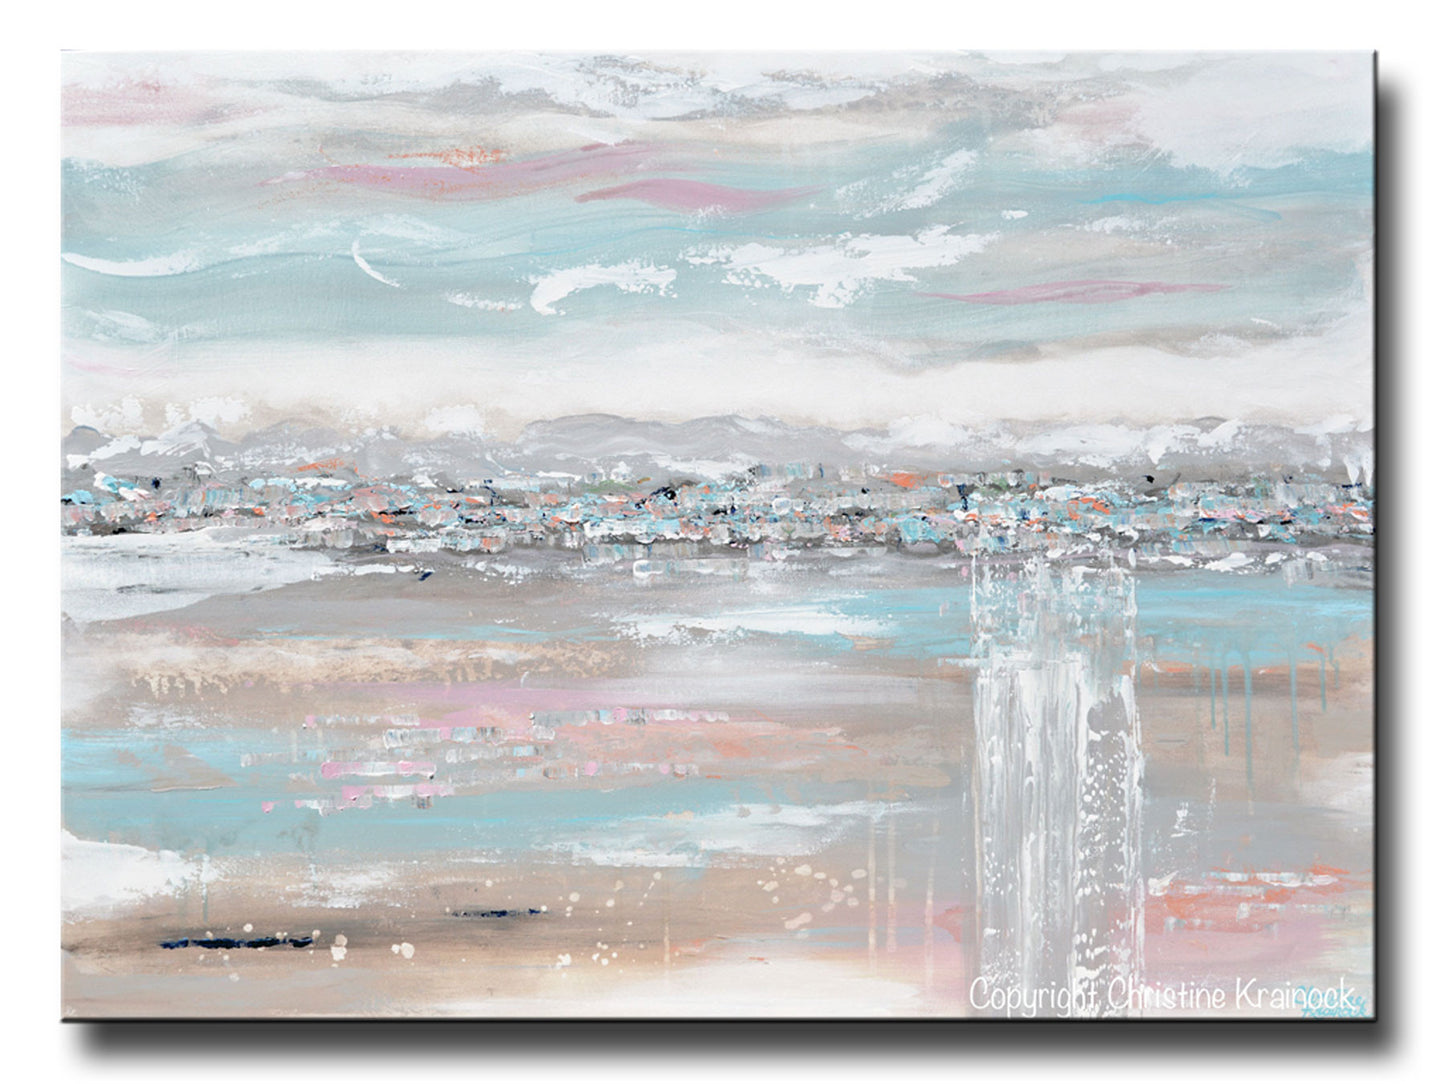 ORIGINAL Art Abstract Painting Landscape Blue Grey Pink Taupe Textured Minimalist LARGE 36x48"